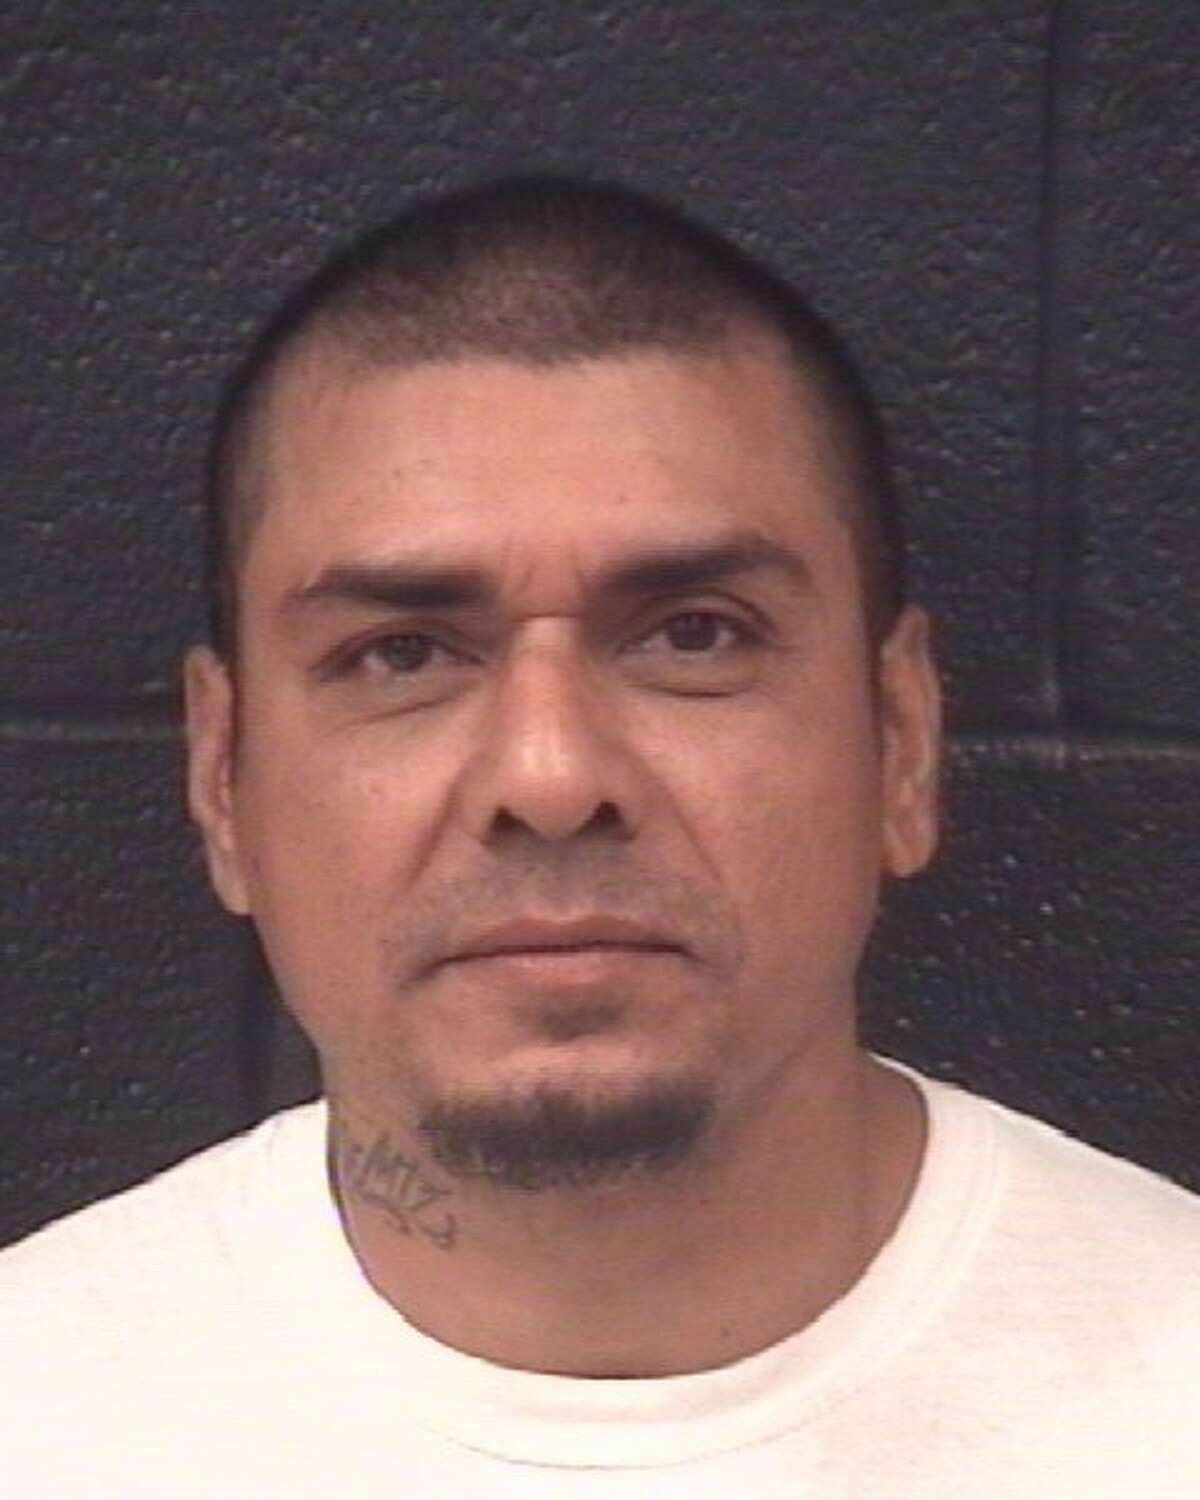 Raul Alejandro Martinez, 46, is wanted on two warrants. To report his whereabouts, call Laredo Crime Stoppers at 727-TIPS (8477)